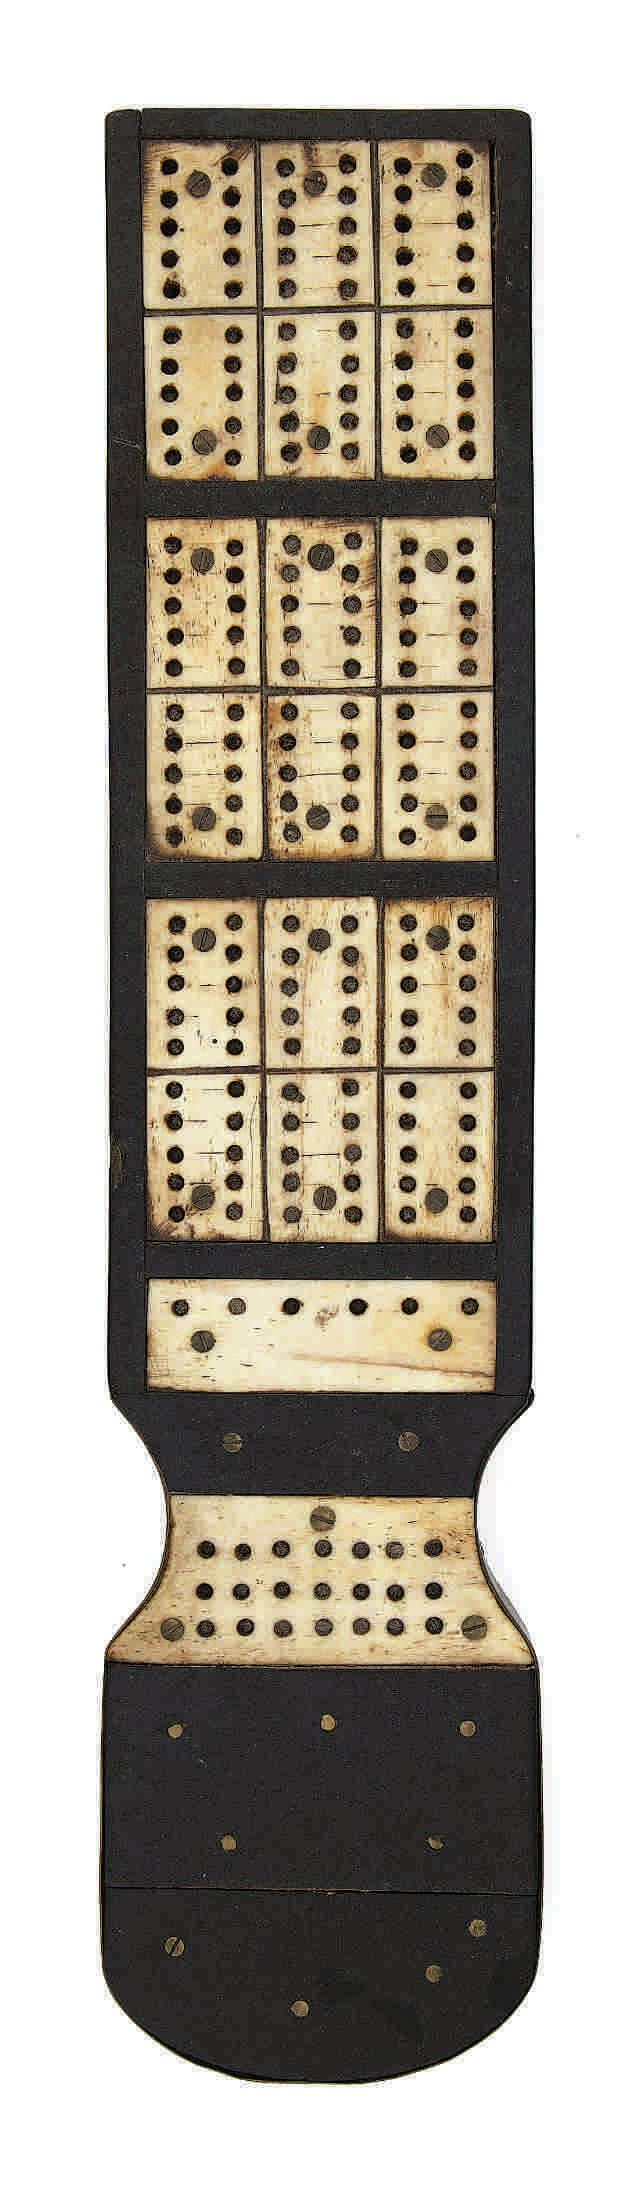 Cribbage is a centuries-old travel game. In the 19th century, sailors on whaling ships made and used boards like this one to pass the time on long voyages.